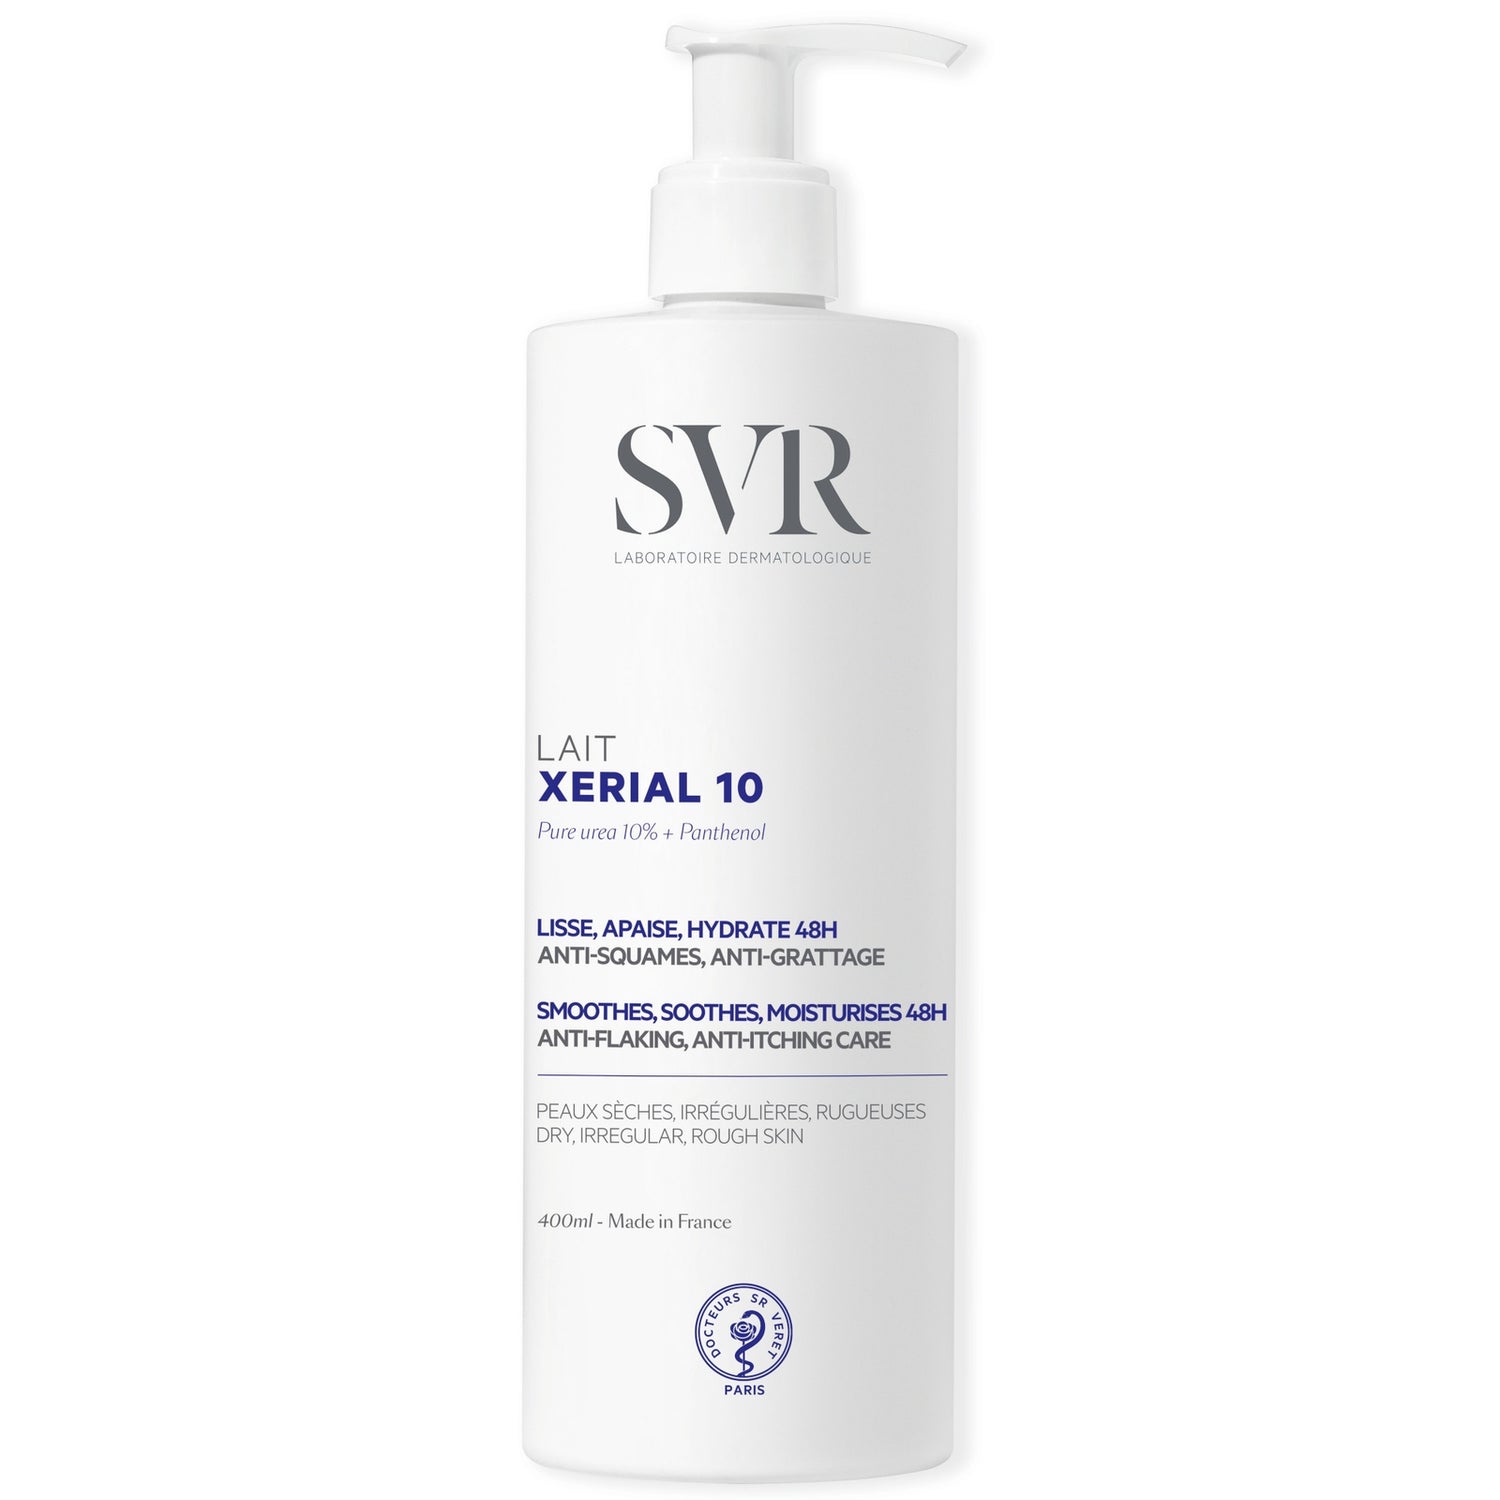 SVR Xerial 10 Body Lotion for Extremely Dehydrated + Flaking Skin - 400ml